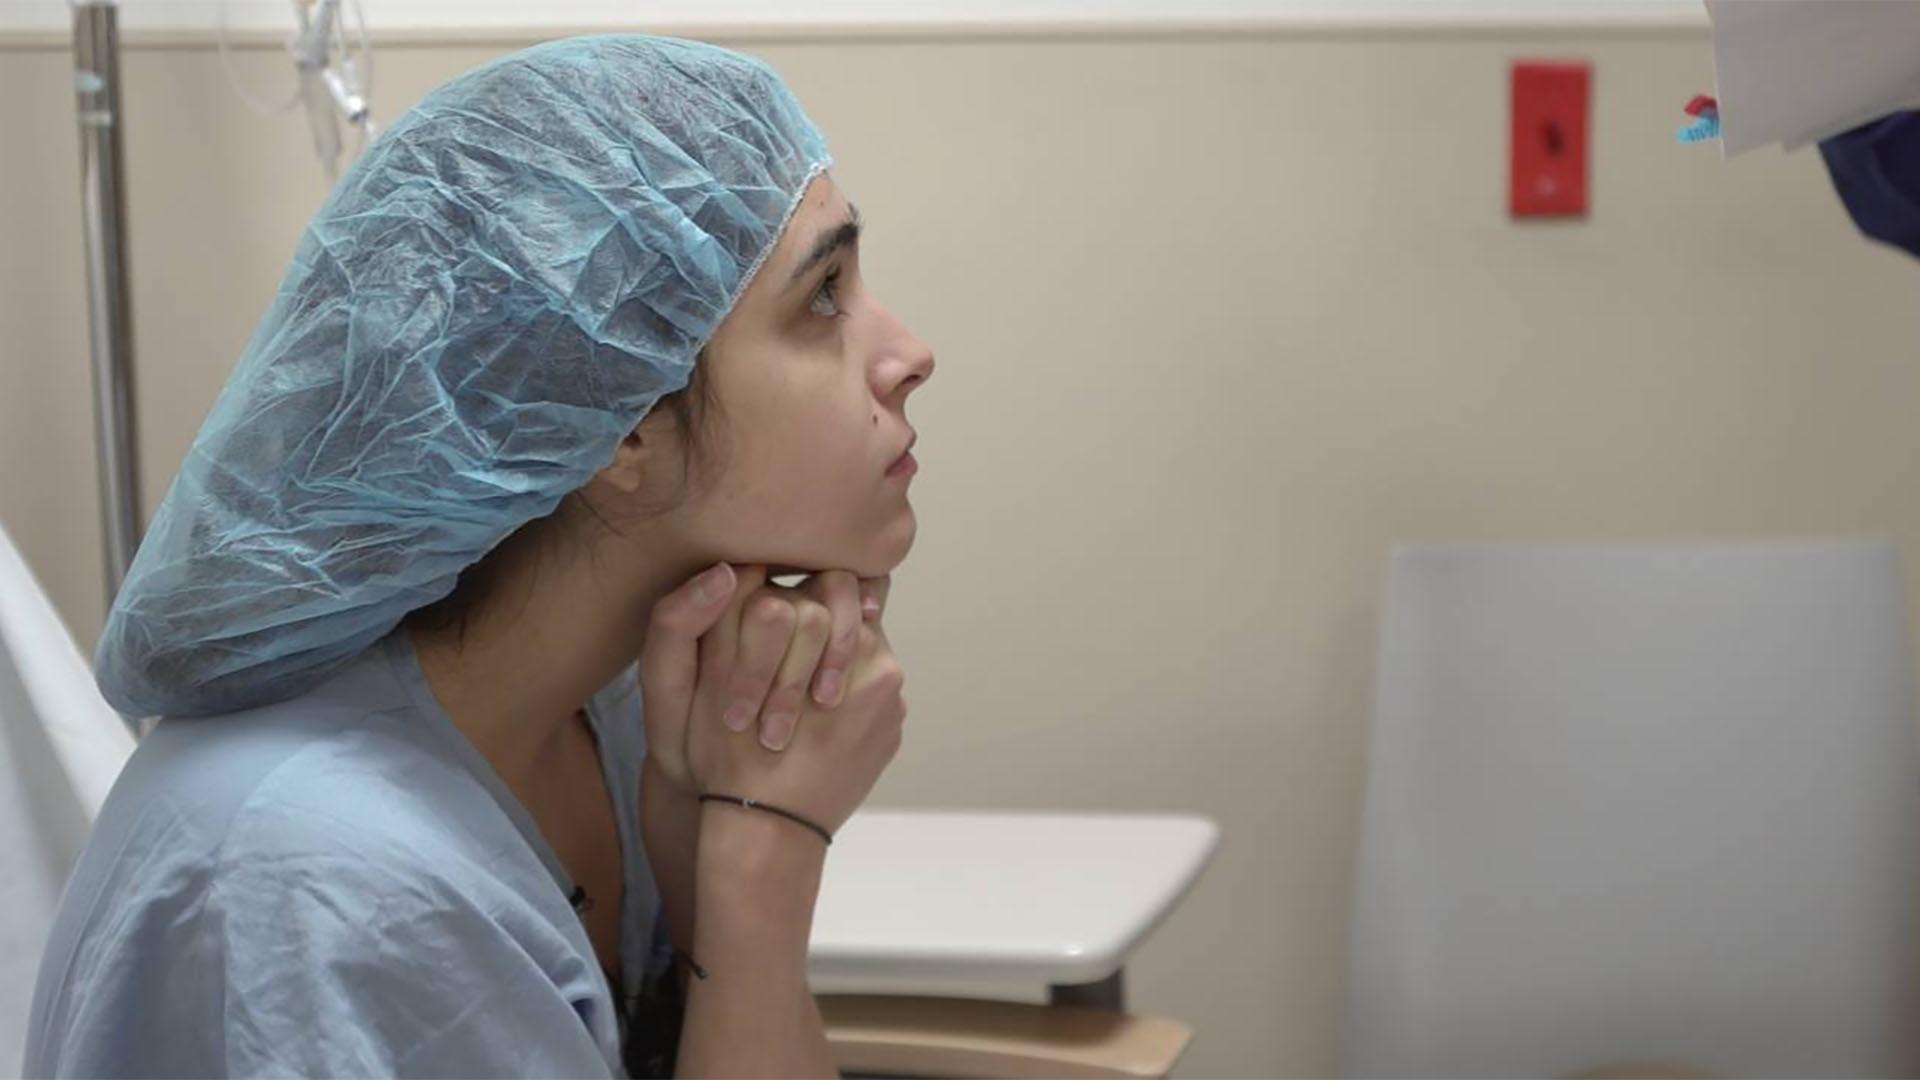 An endometriosis patient waits in pre-operative area for surgery.